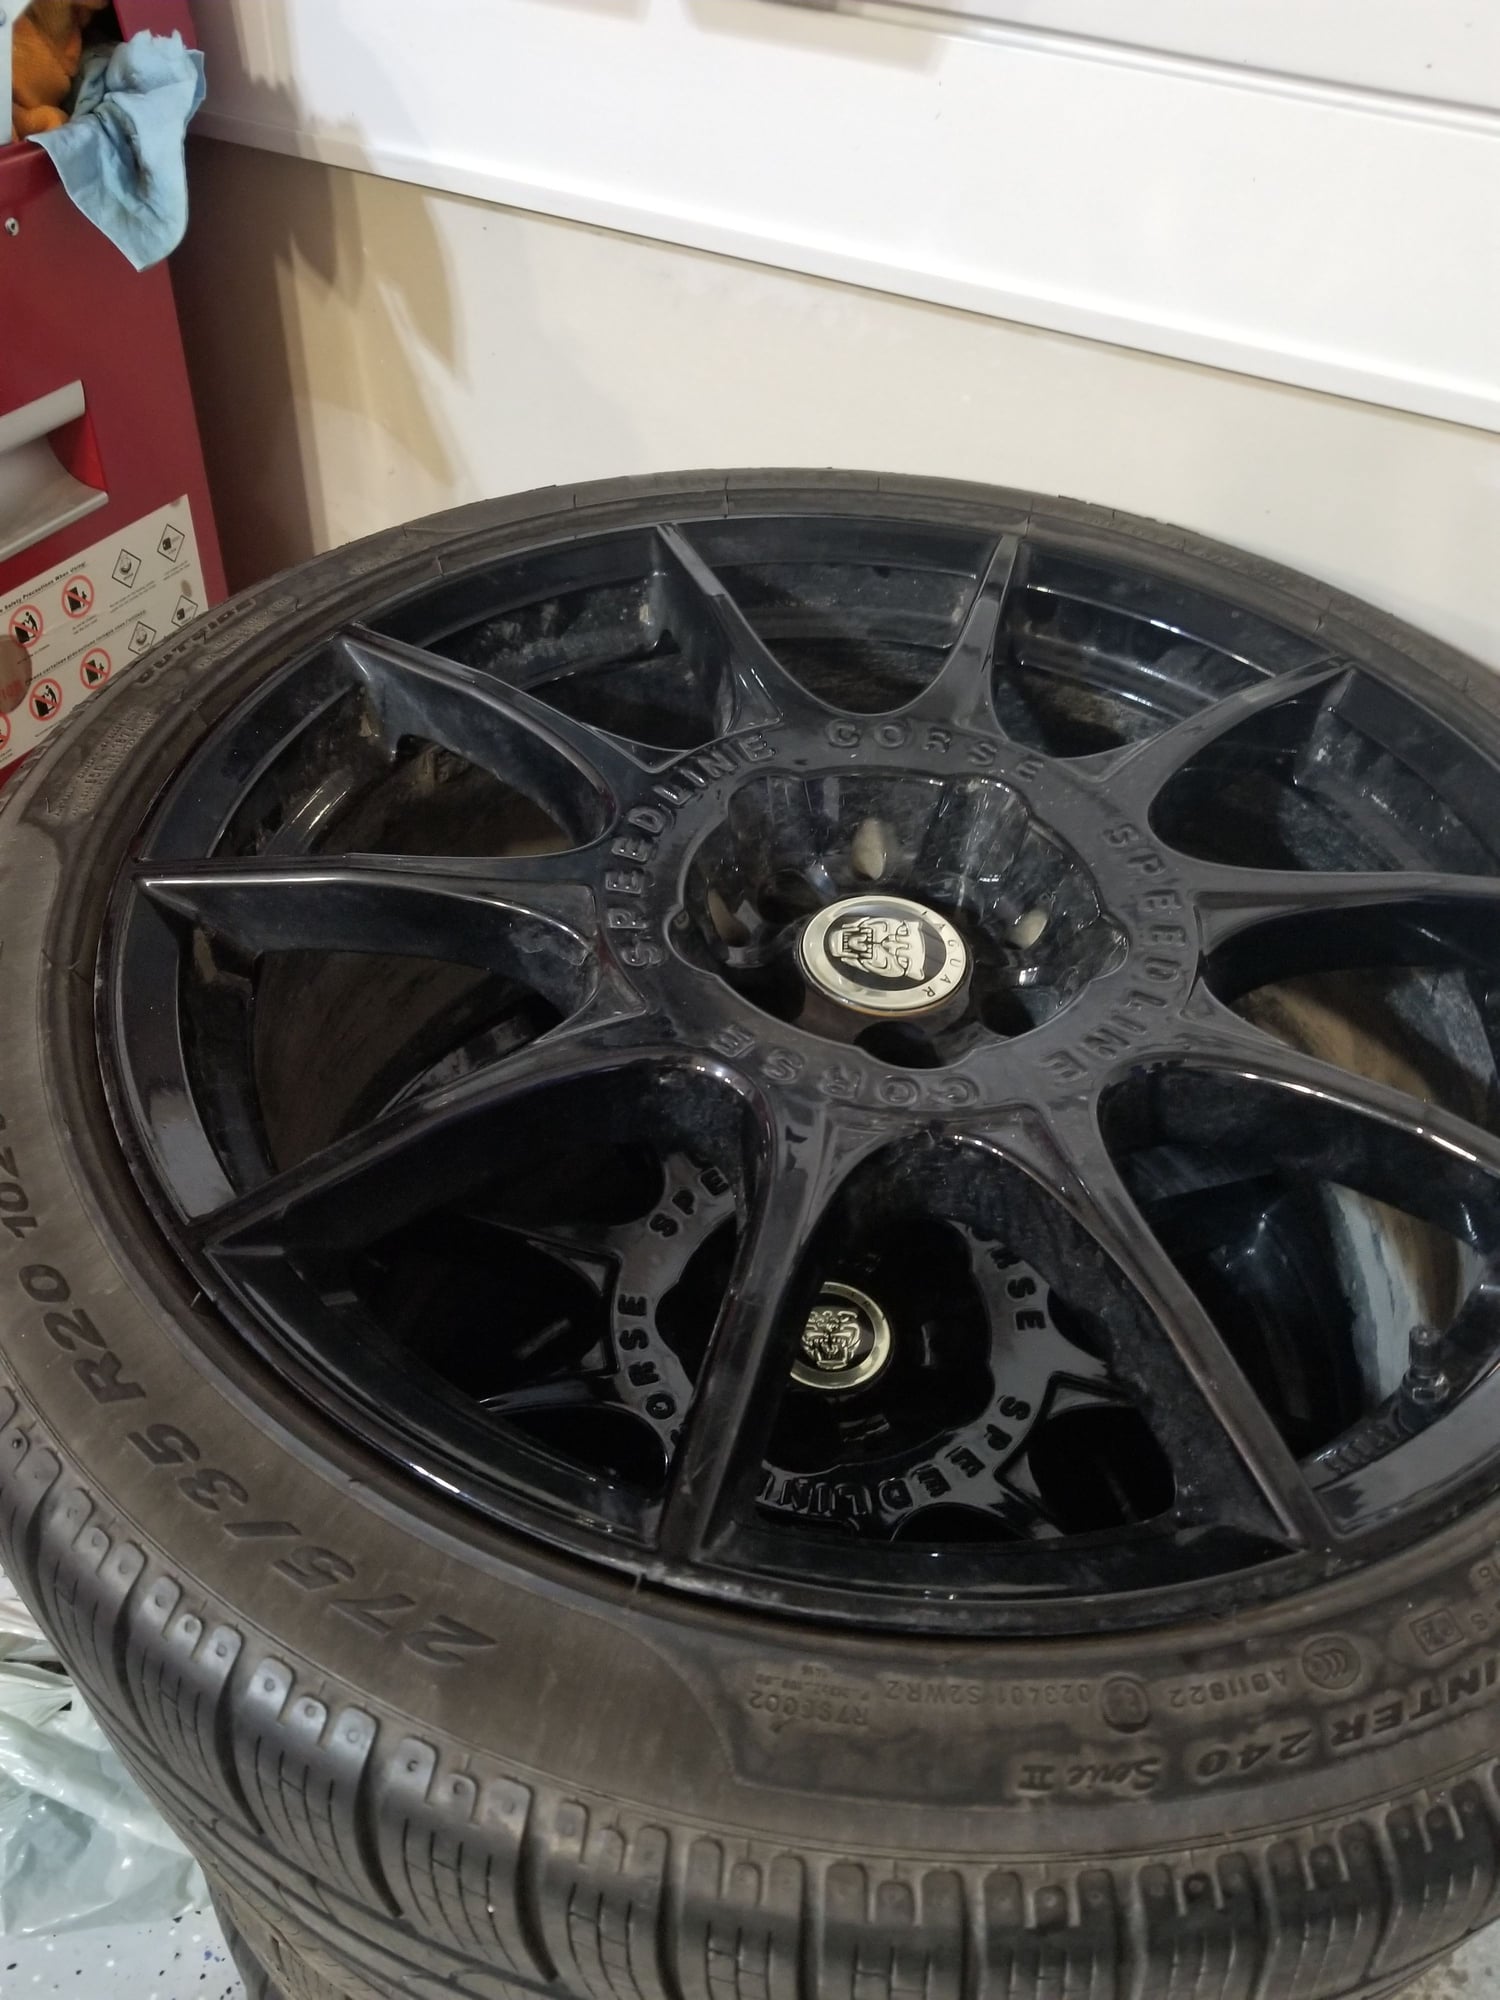 Wheels and Tires/Axles - Xj / xf / xkr - Used - 2010 to 2020 Jaguar XJ - 2012 to 2020 Jaguar XF - Mississauga, ON L5N 5P, Canada